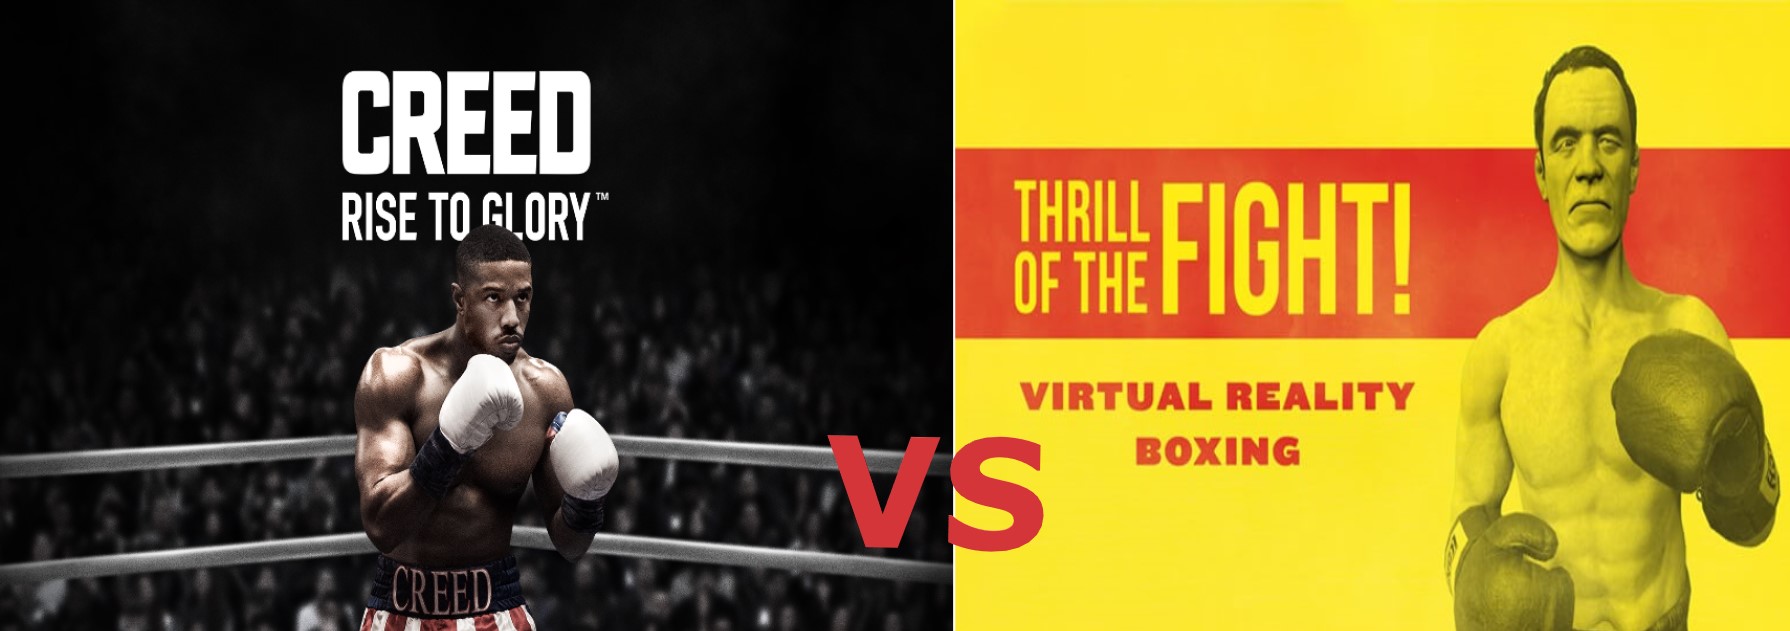 Thrill of the Fight vs Creed: Rise to Glory